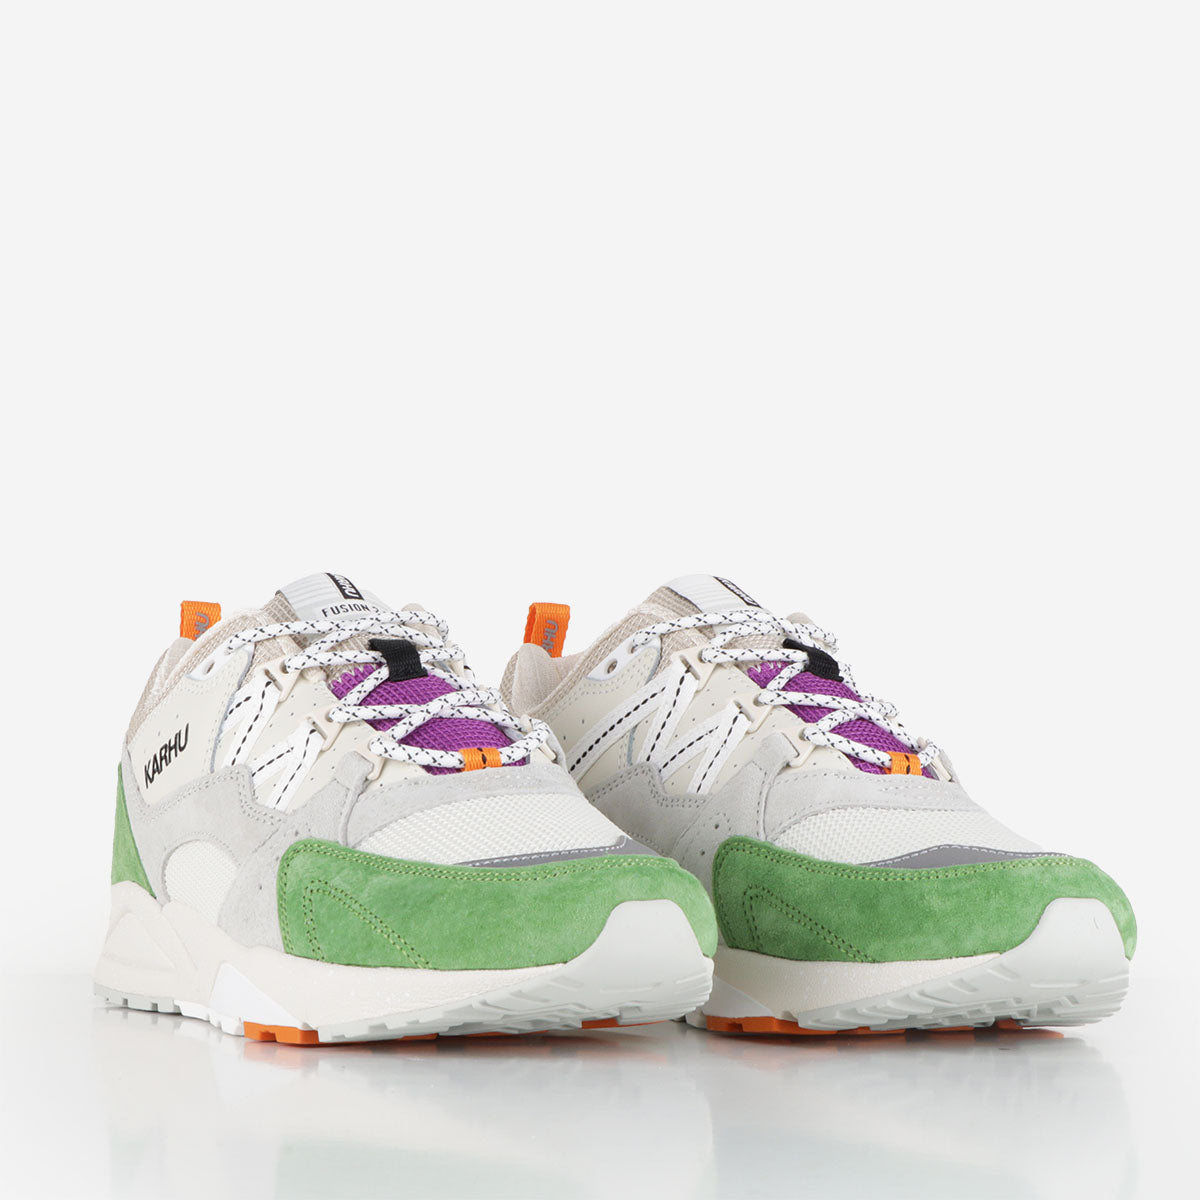 Karhu Fusion 2.0 'Flow State Pack' Shoes, Piquant Green/Bright White, Detail Shot 2